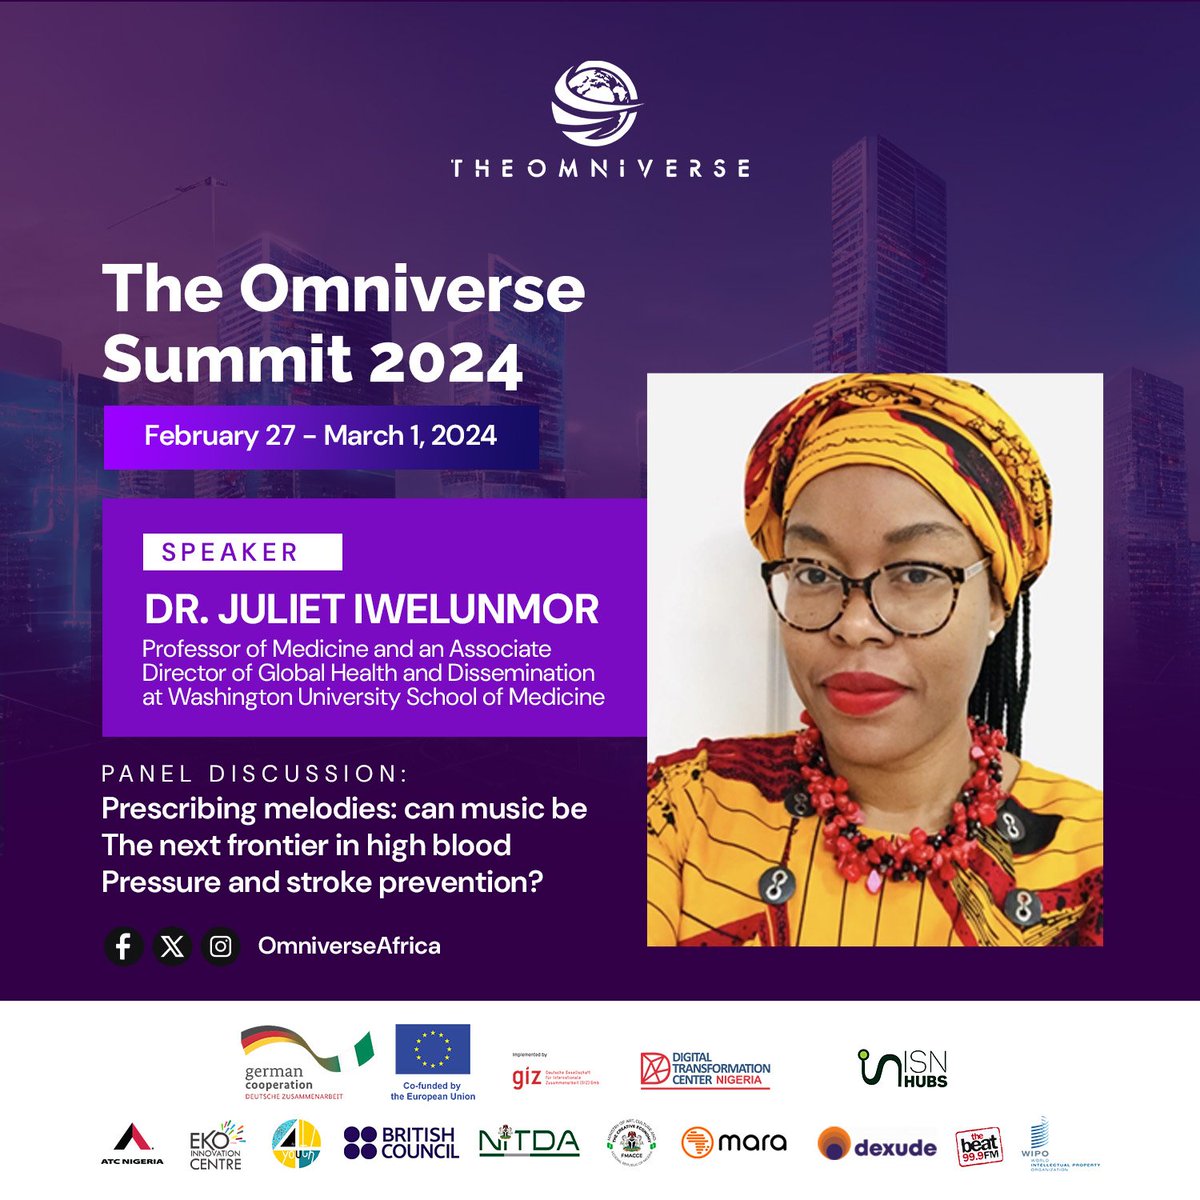 Join our founder, Dr Juliet Iwelunmor, @iwelunmorj as a speaker at the Omniverse Summit 2024 as she dives into the topic, 'Prescribing Melodies: Can Music be the next frontier in high blood pressure and stroke prevention'. Register here: theomniverse.africa/register/